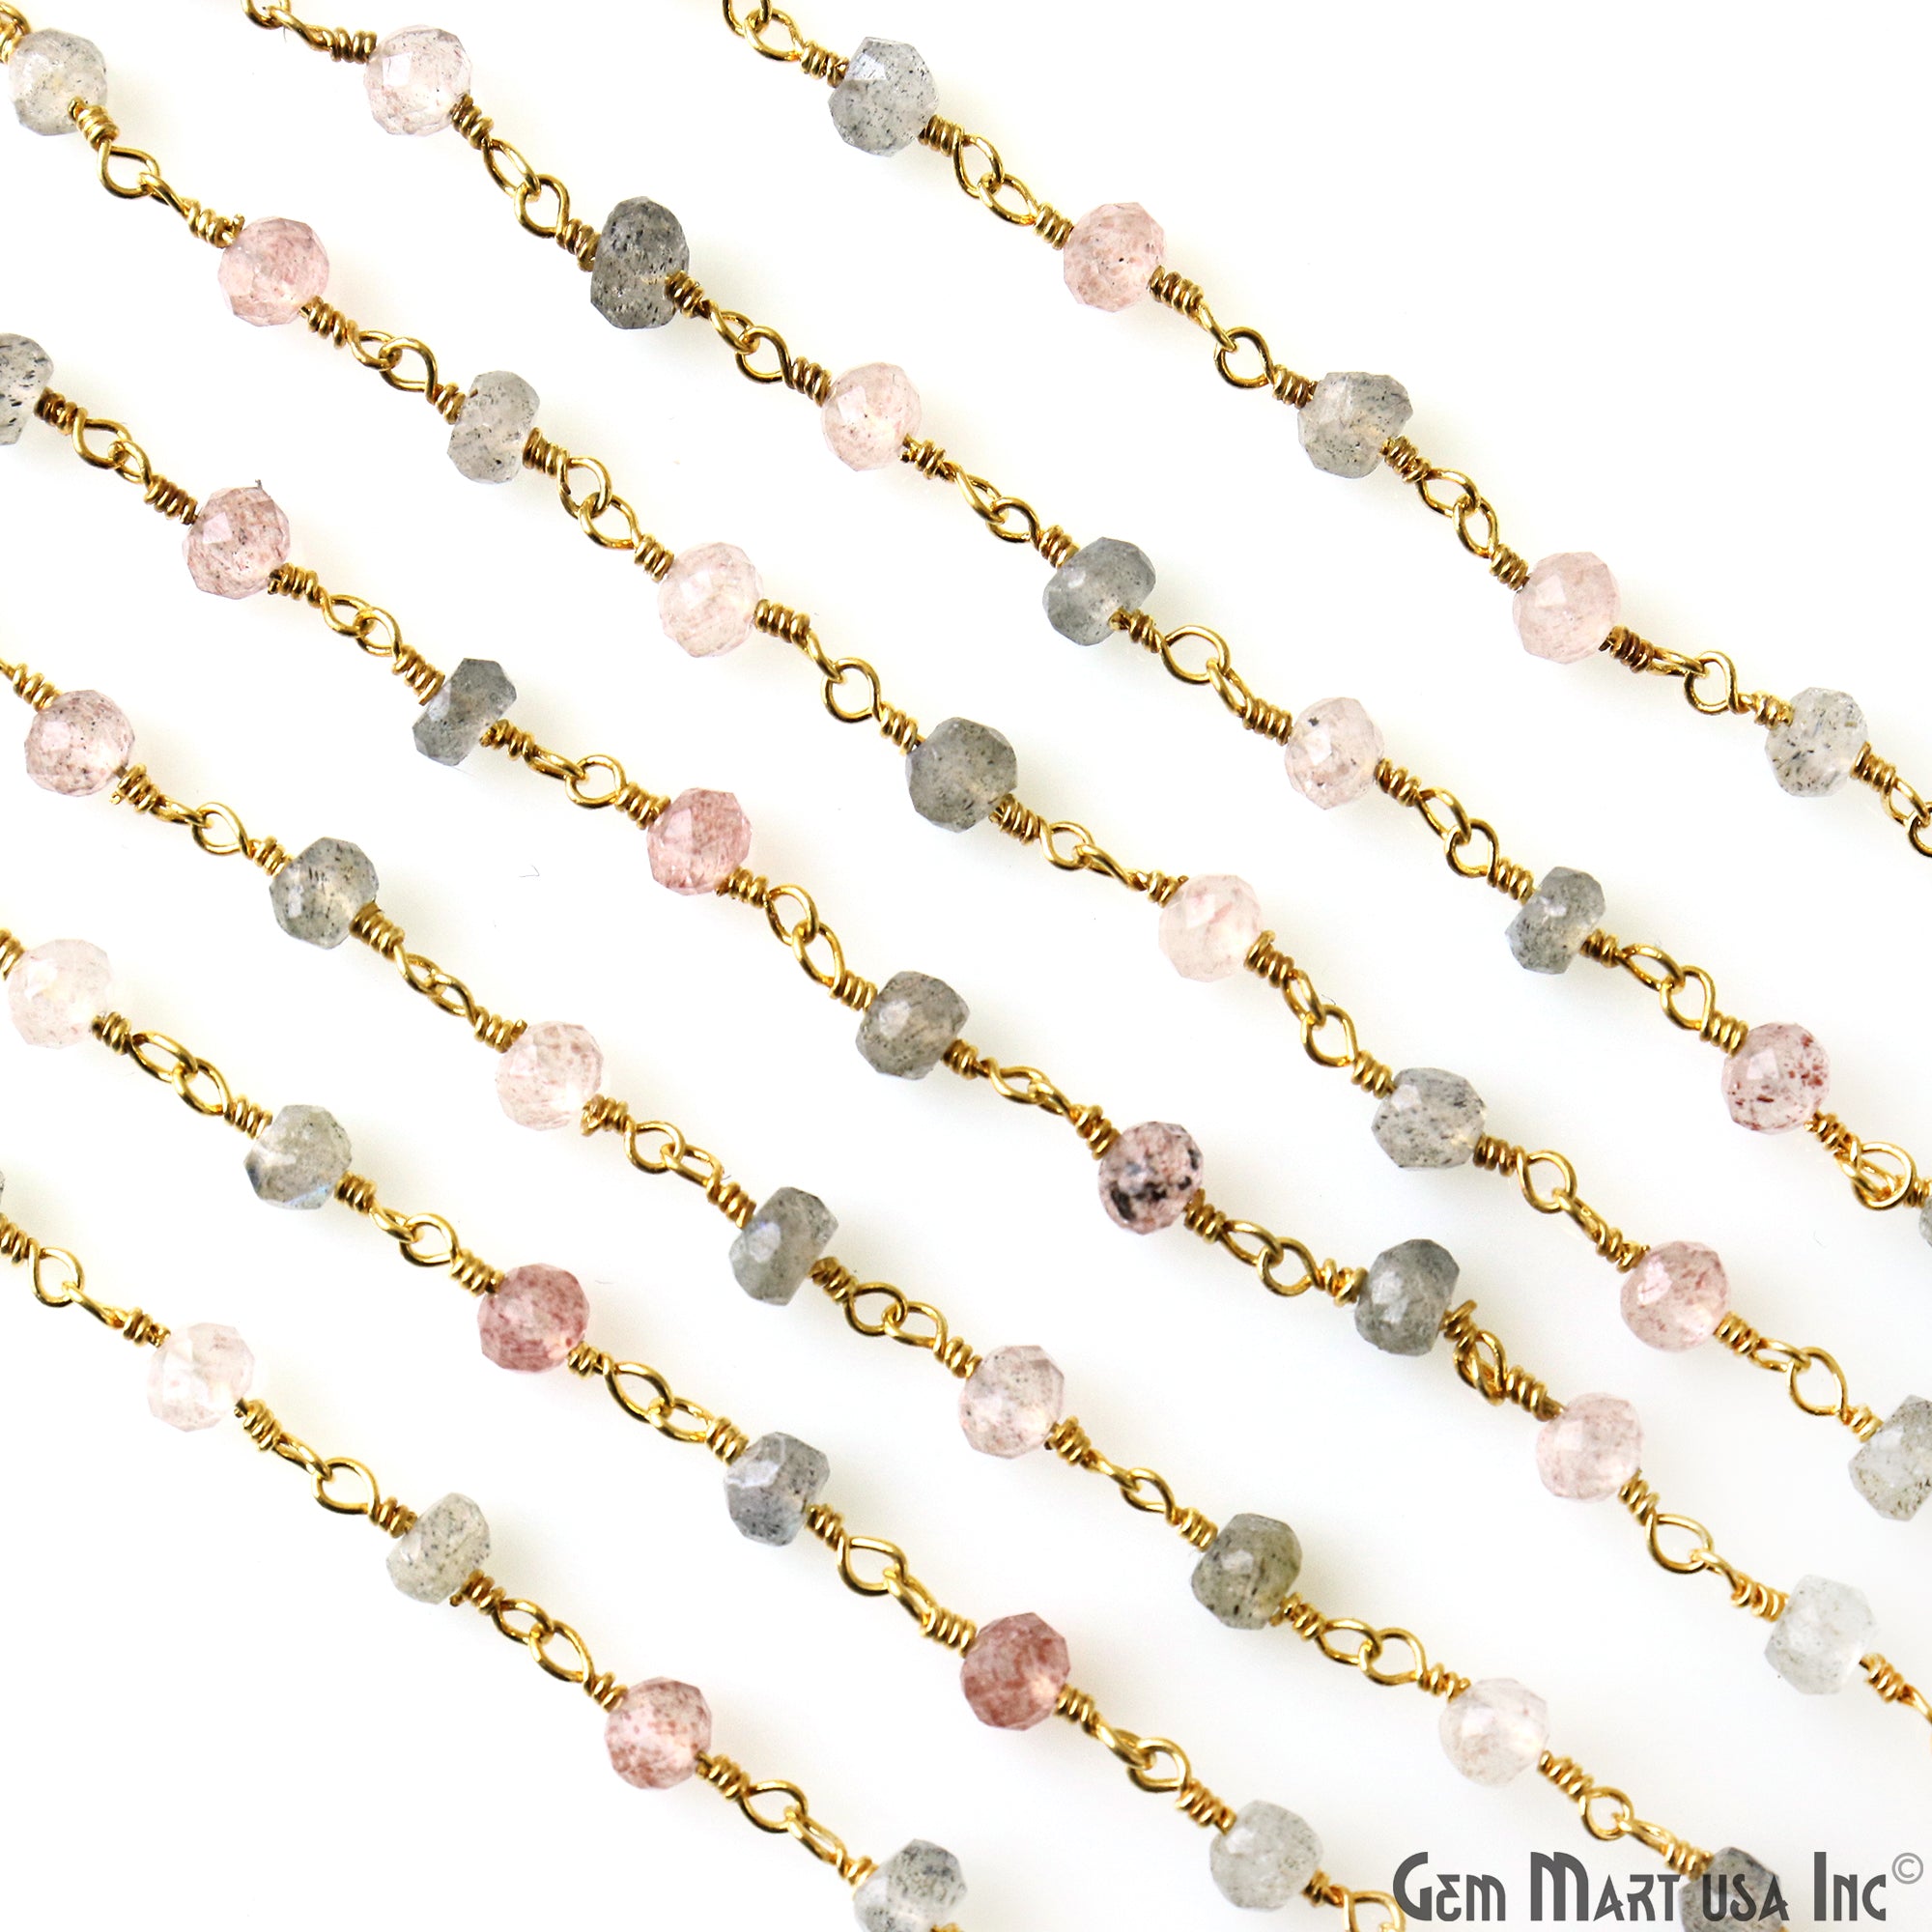 Strawberry Quartz & Labradorite Faceted Beads Gold Plated Wire Wrapped Rosary Chain